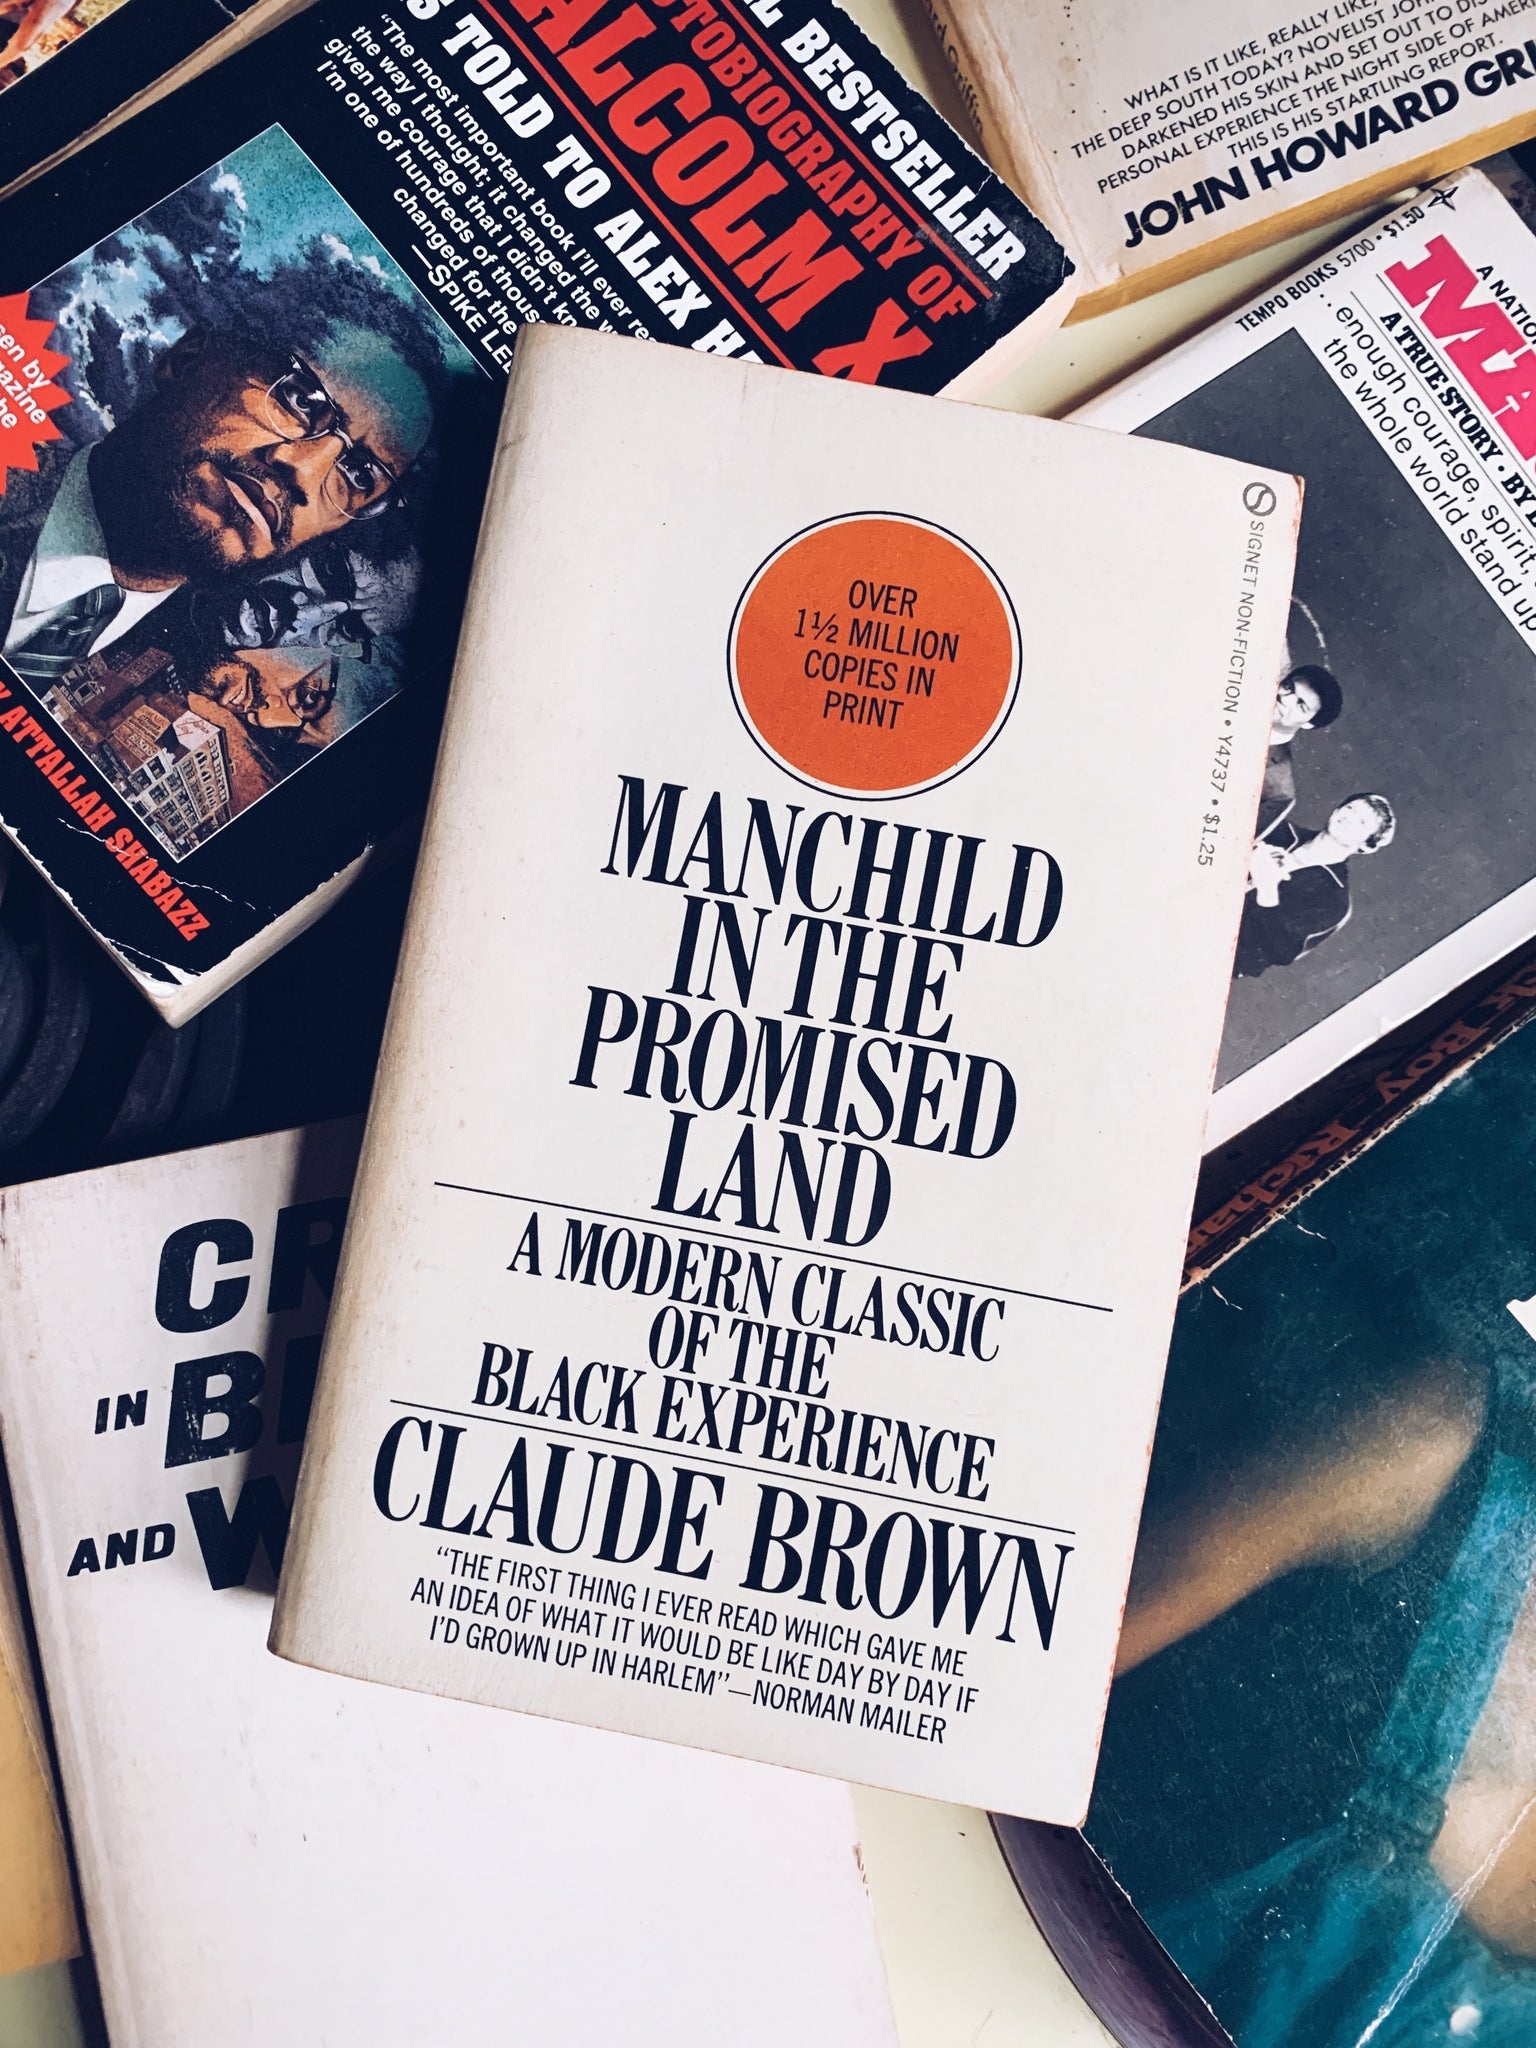 Vintage Softcover “Manchild in the Promised Land" by Claude Brown (1965)